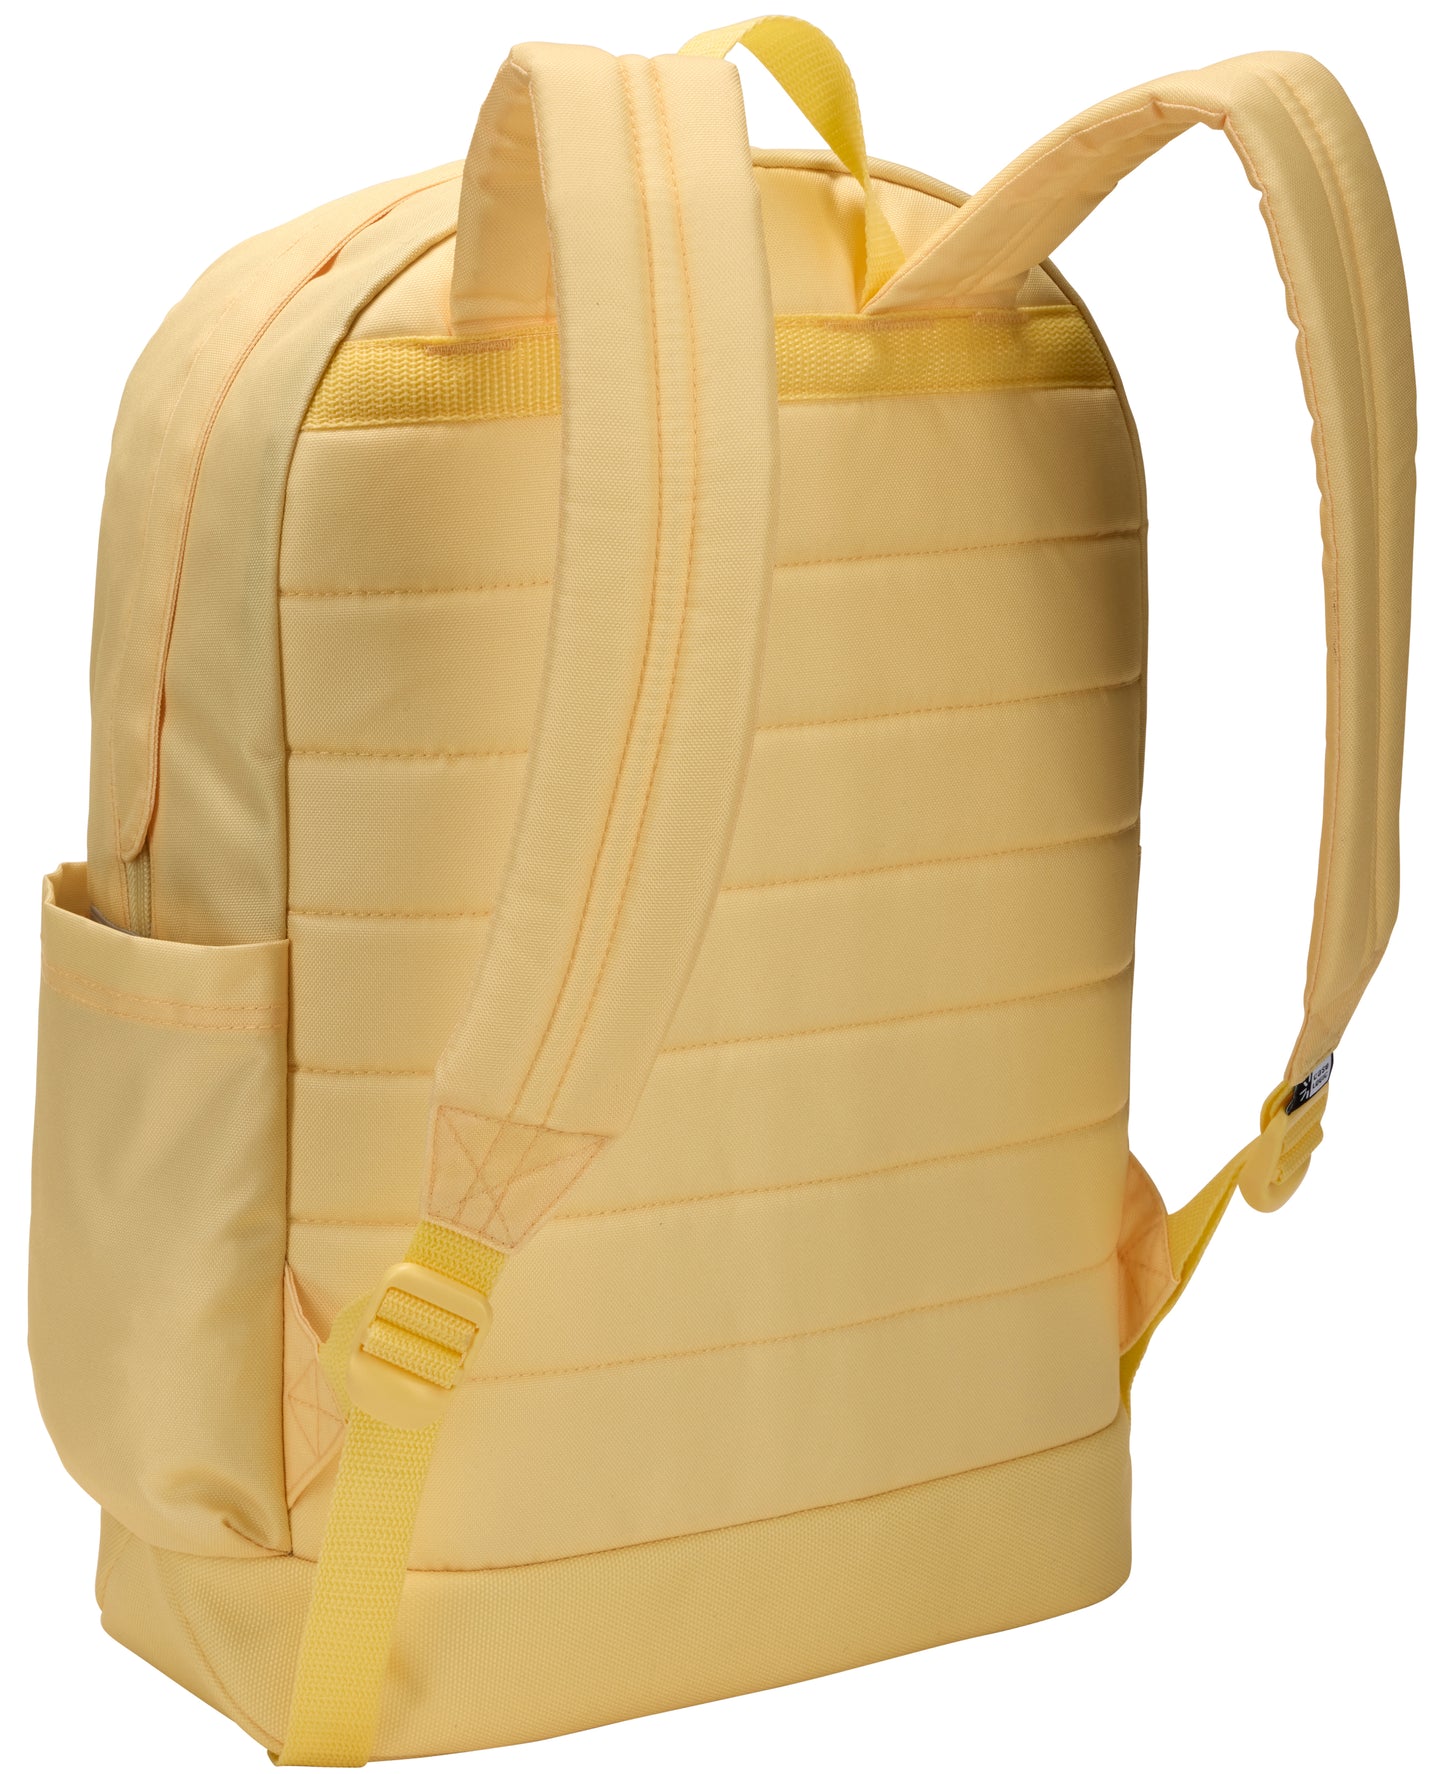 Campus 24L backpack 15.6" Case Logic CCAM-1216 Yellow